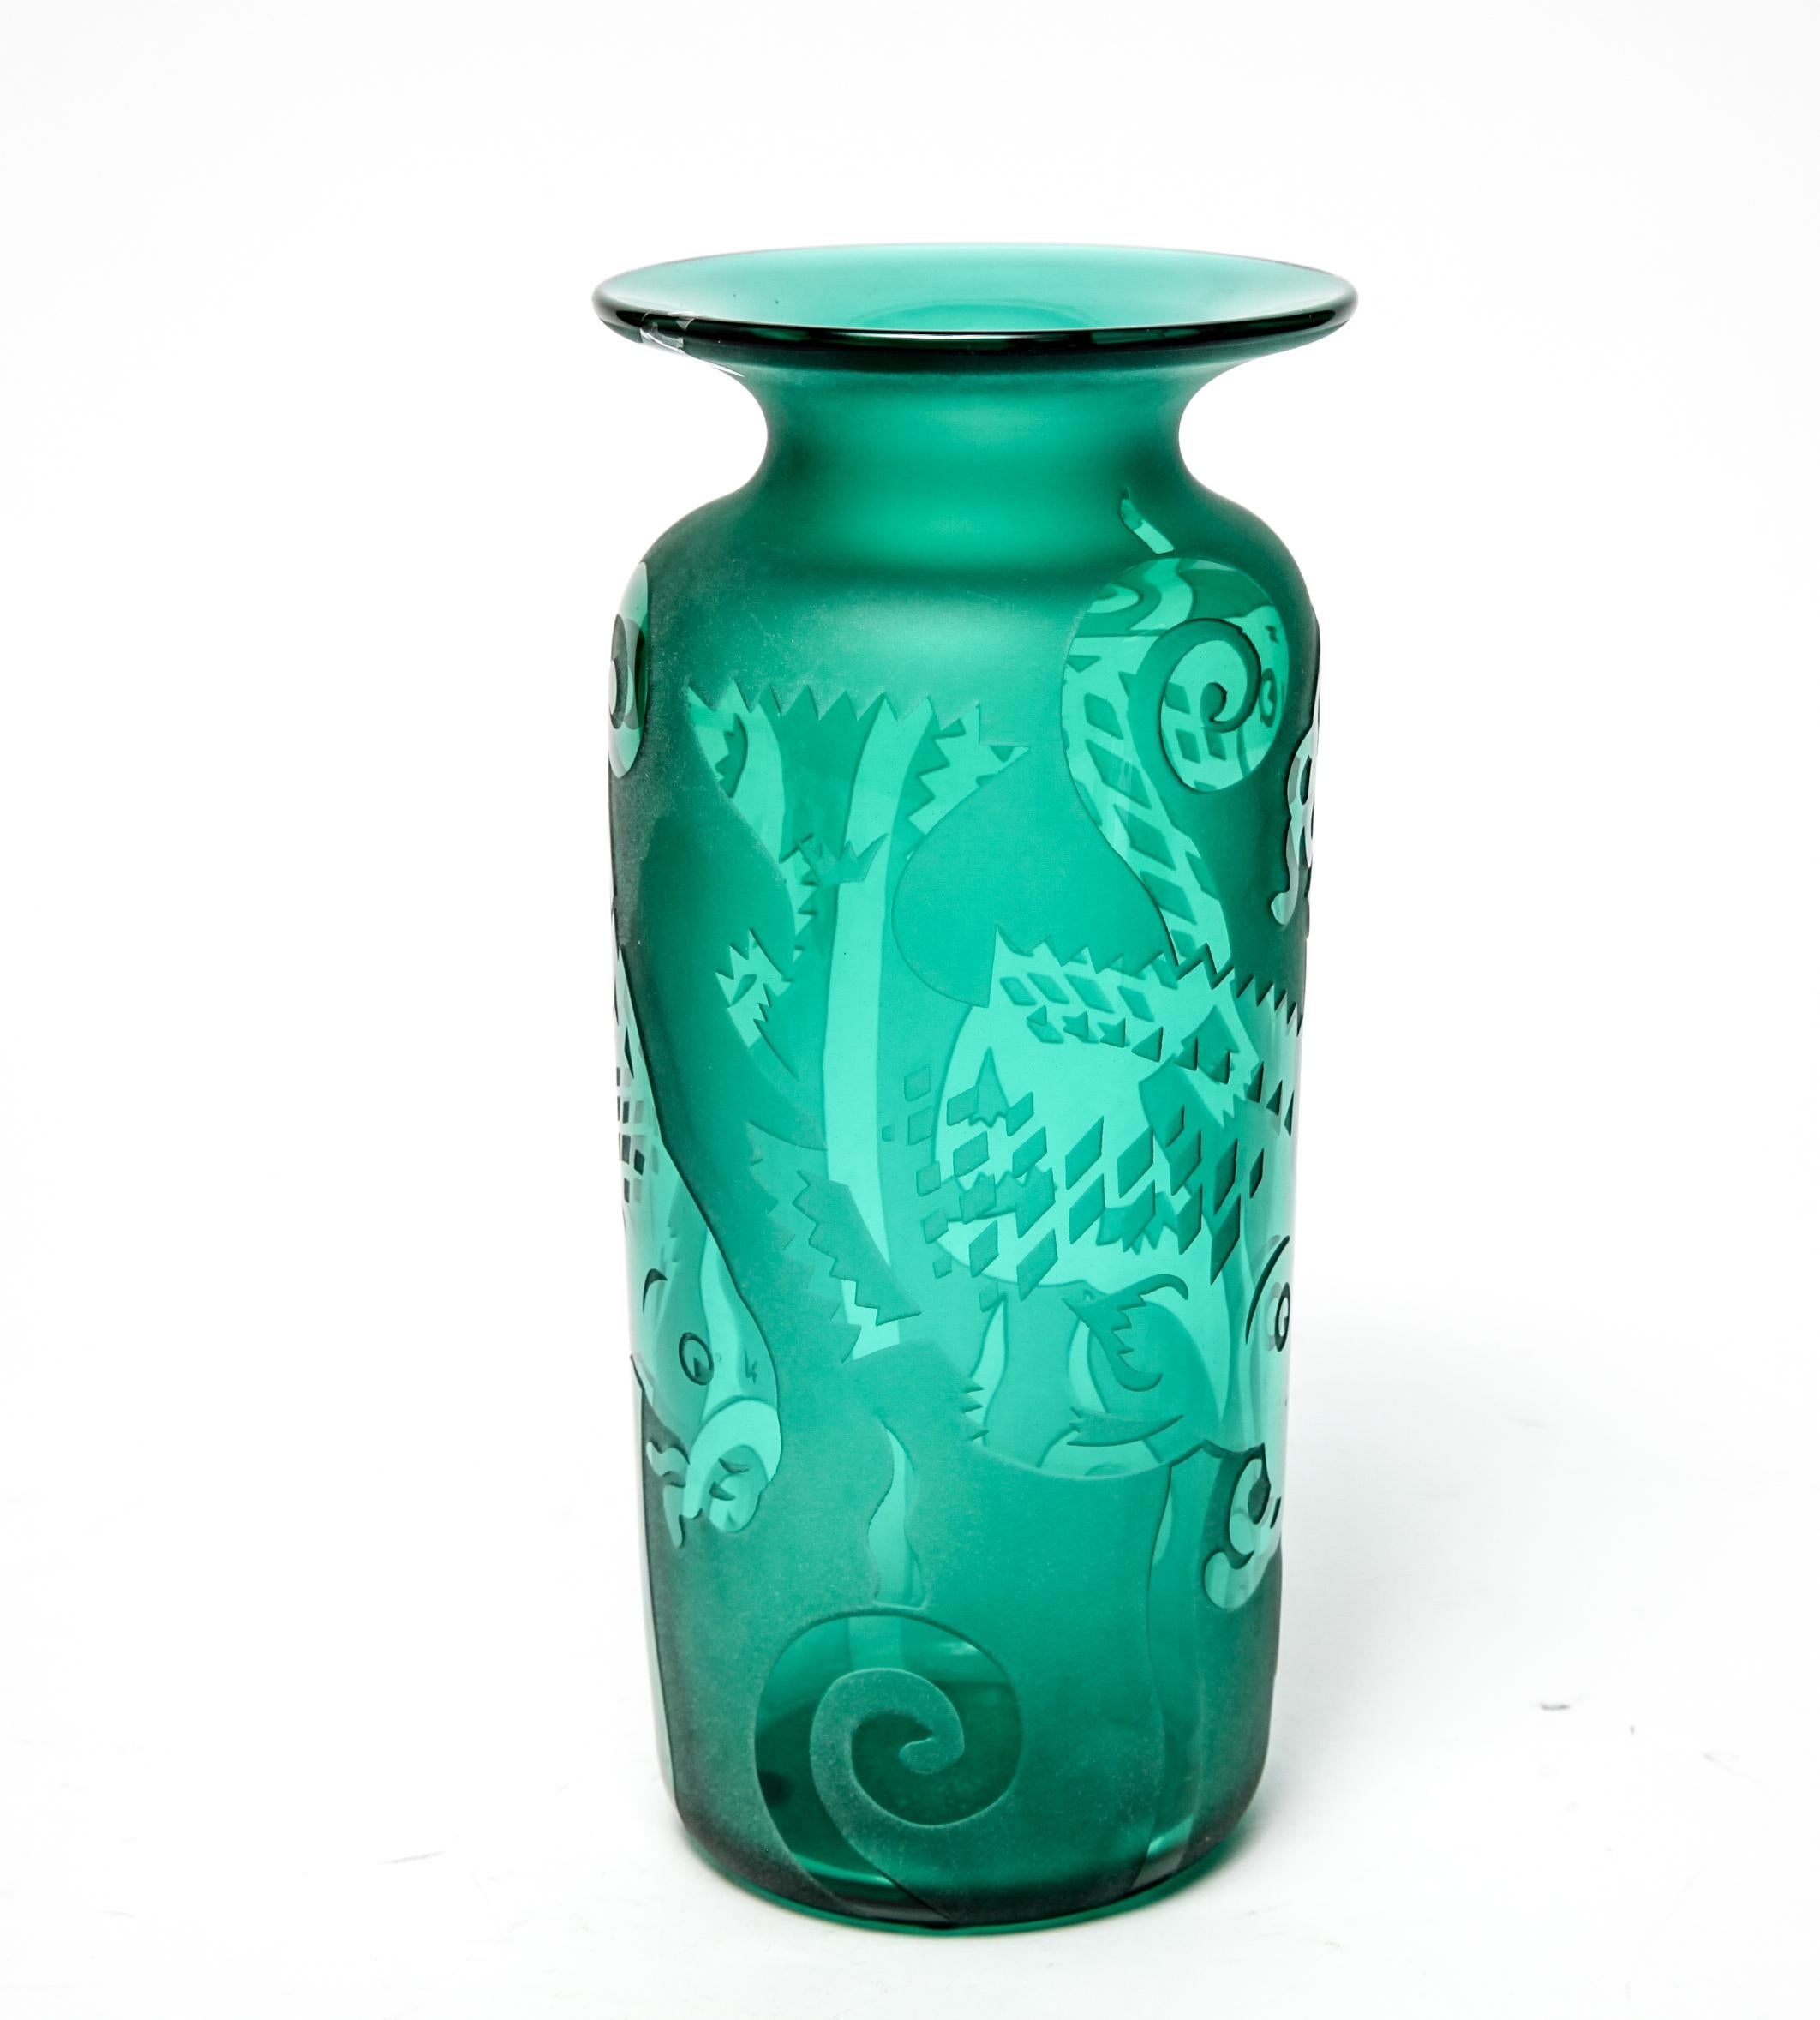 Modern etched art glass vase in green, made by Correia. The piece has a decorative fish motif and is signed on the bottom. In great vintage condition with age-appropriate wear and use.